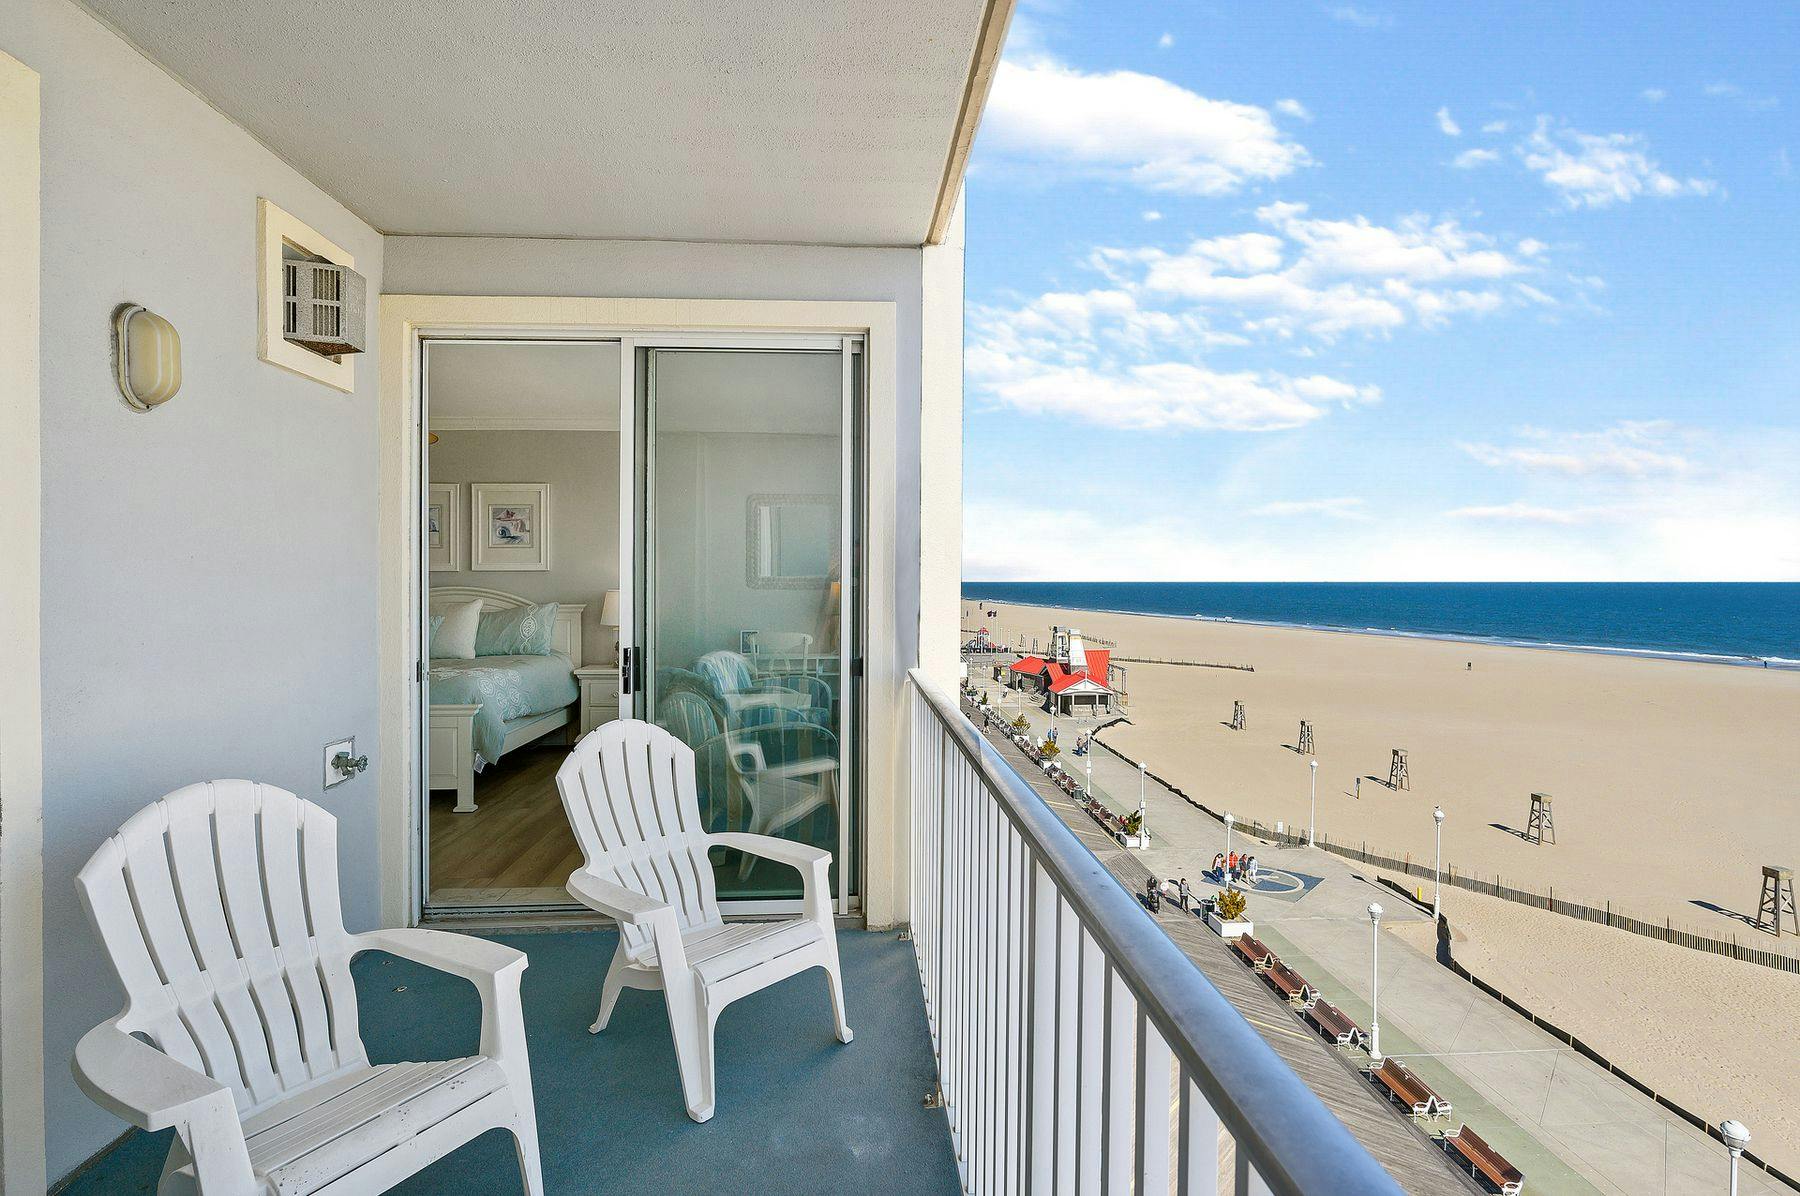 Oceanfront balcony views from Ocean City vacation rental